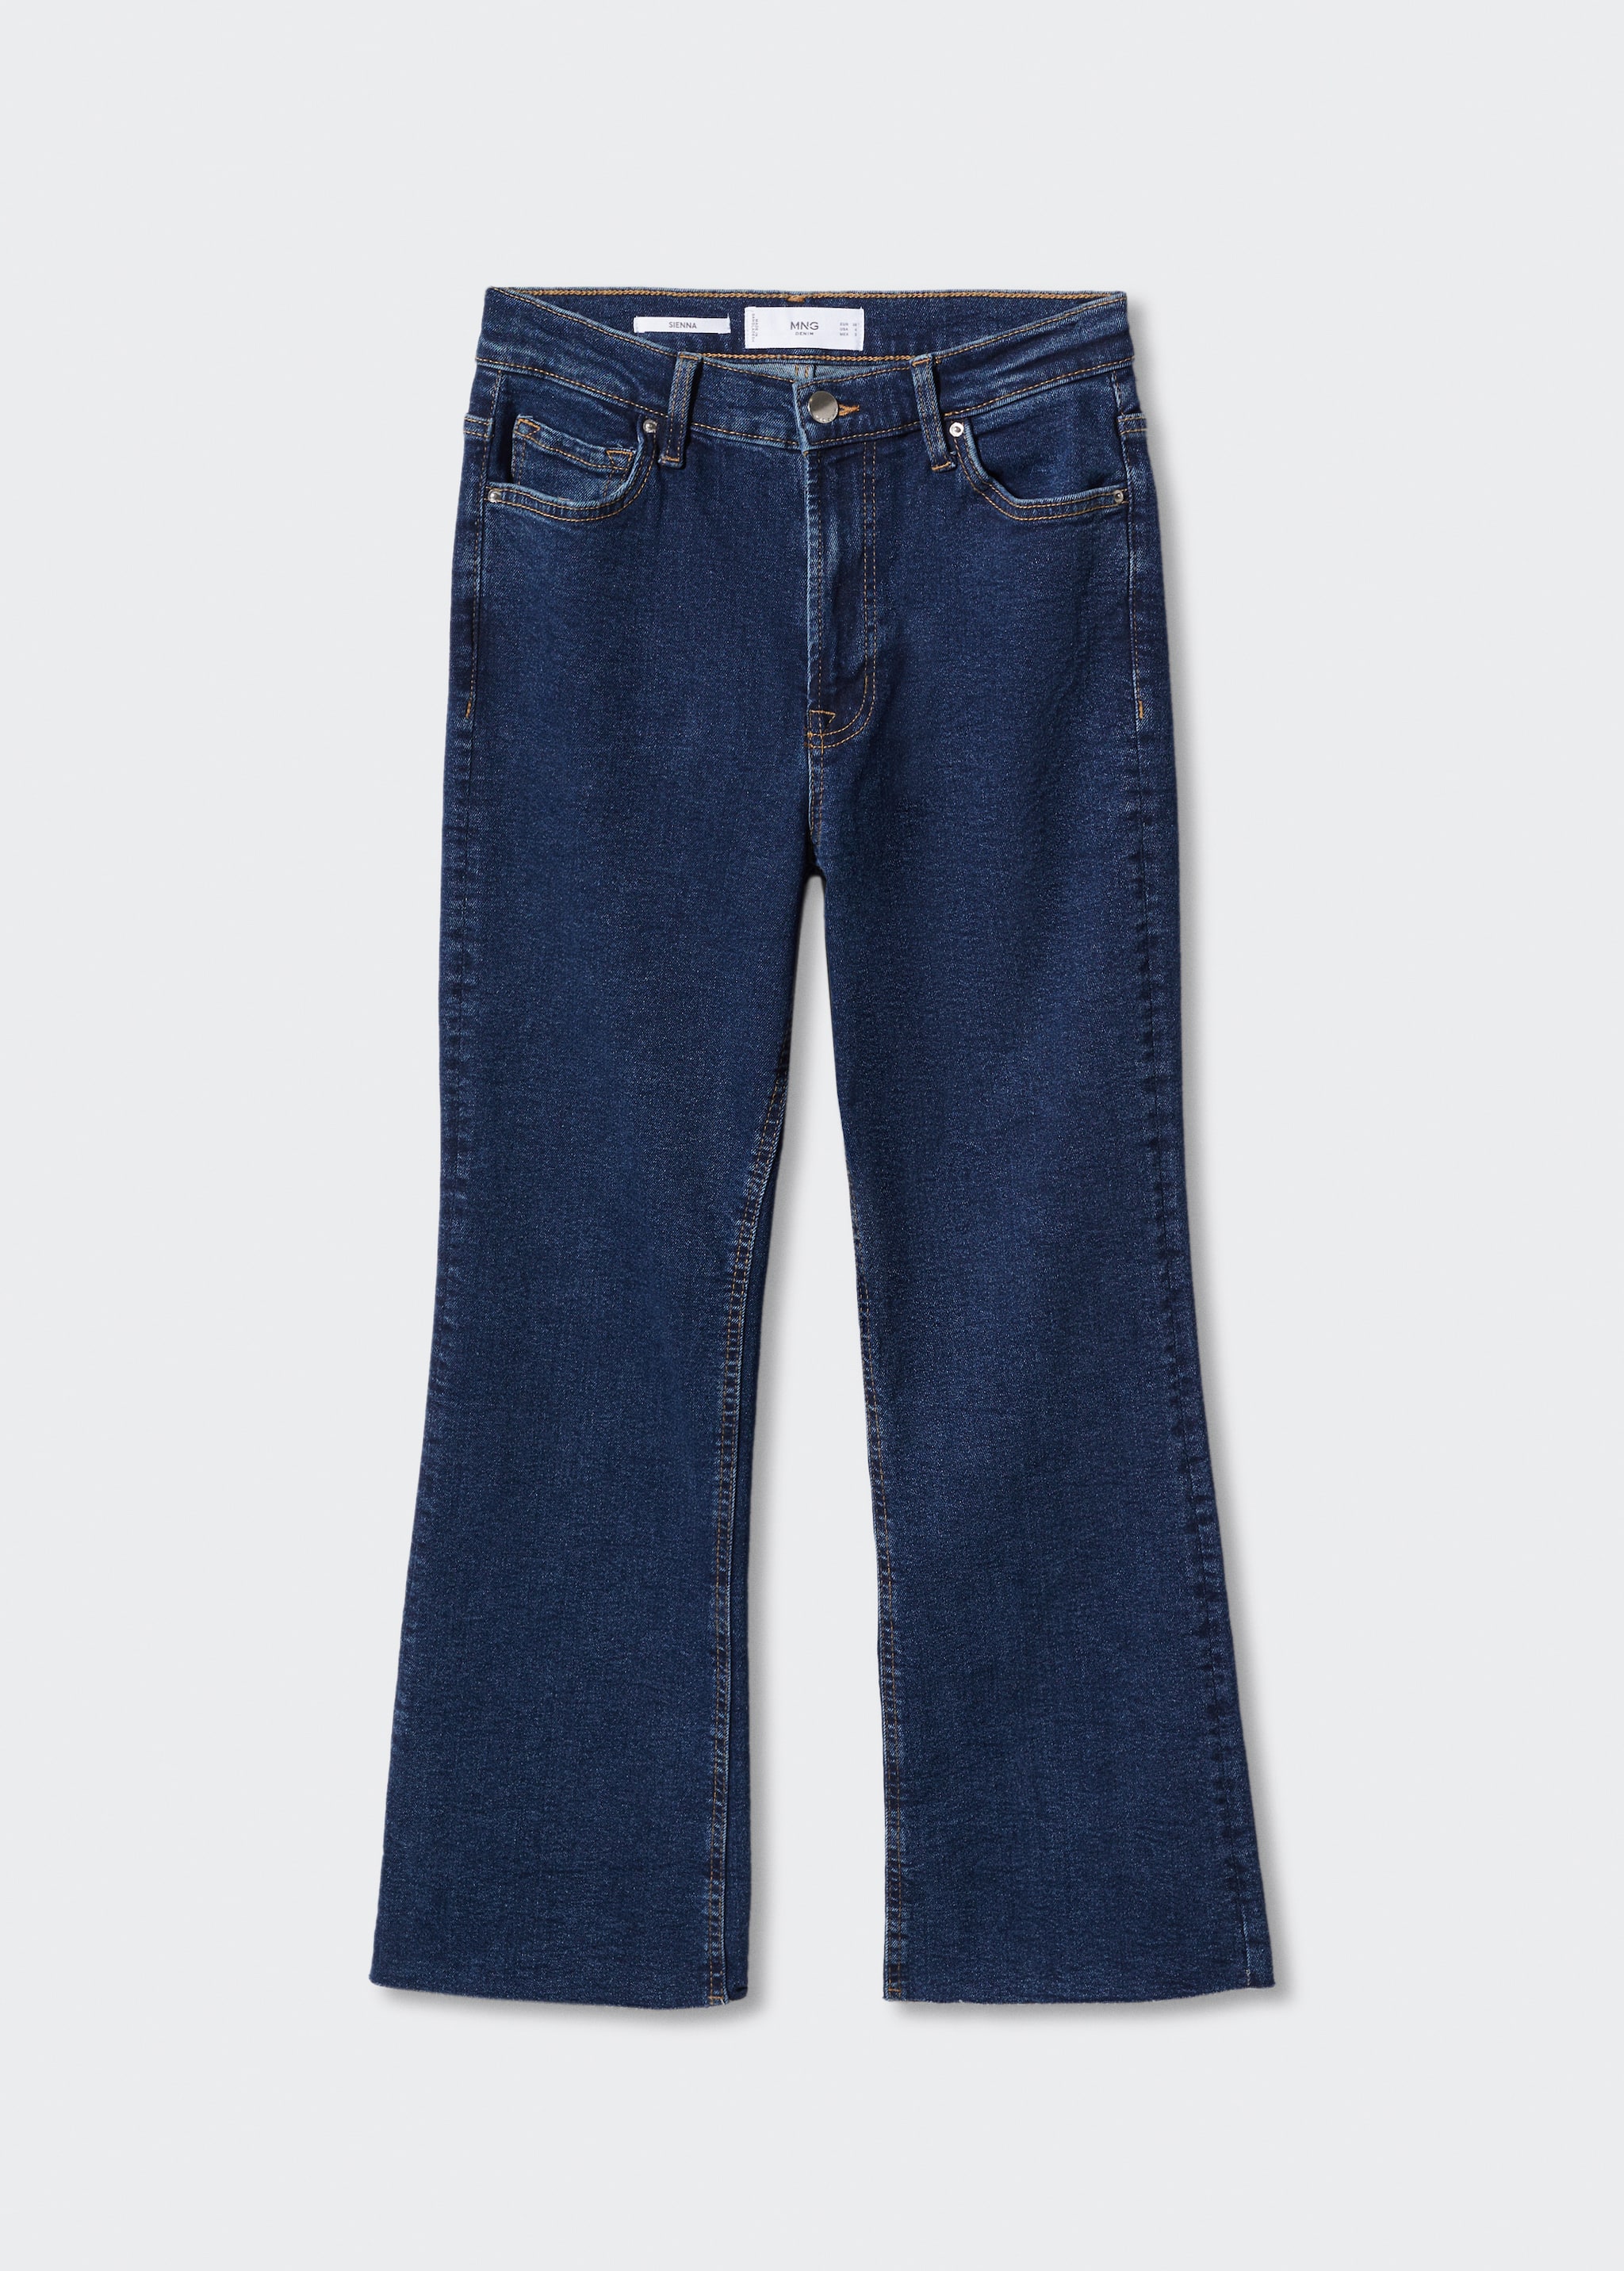 Crop flared jeans - Article without model